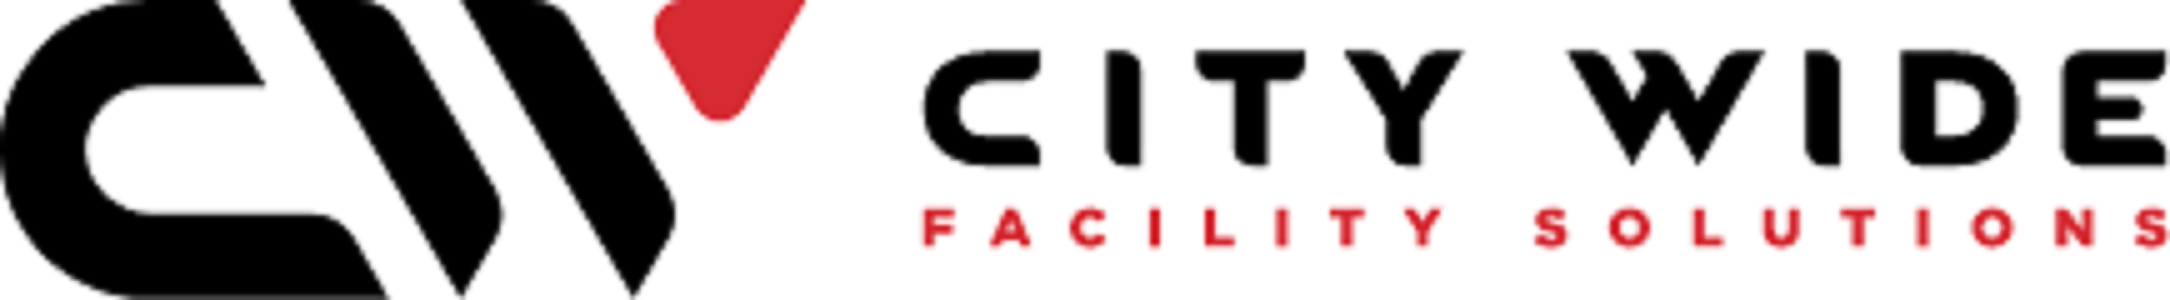 Citywide Facility Solutions Logo